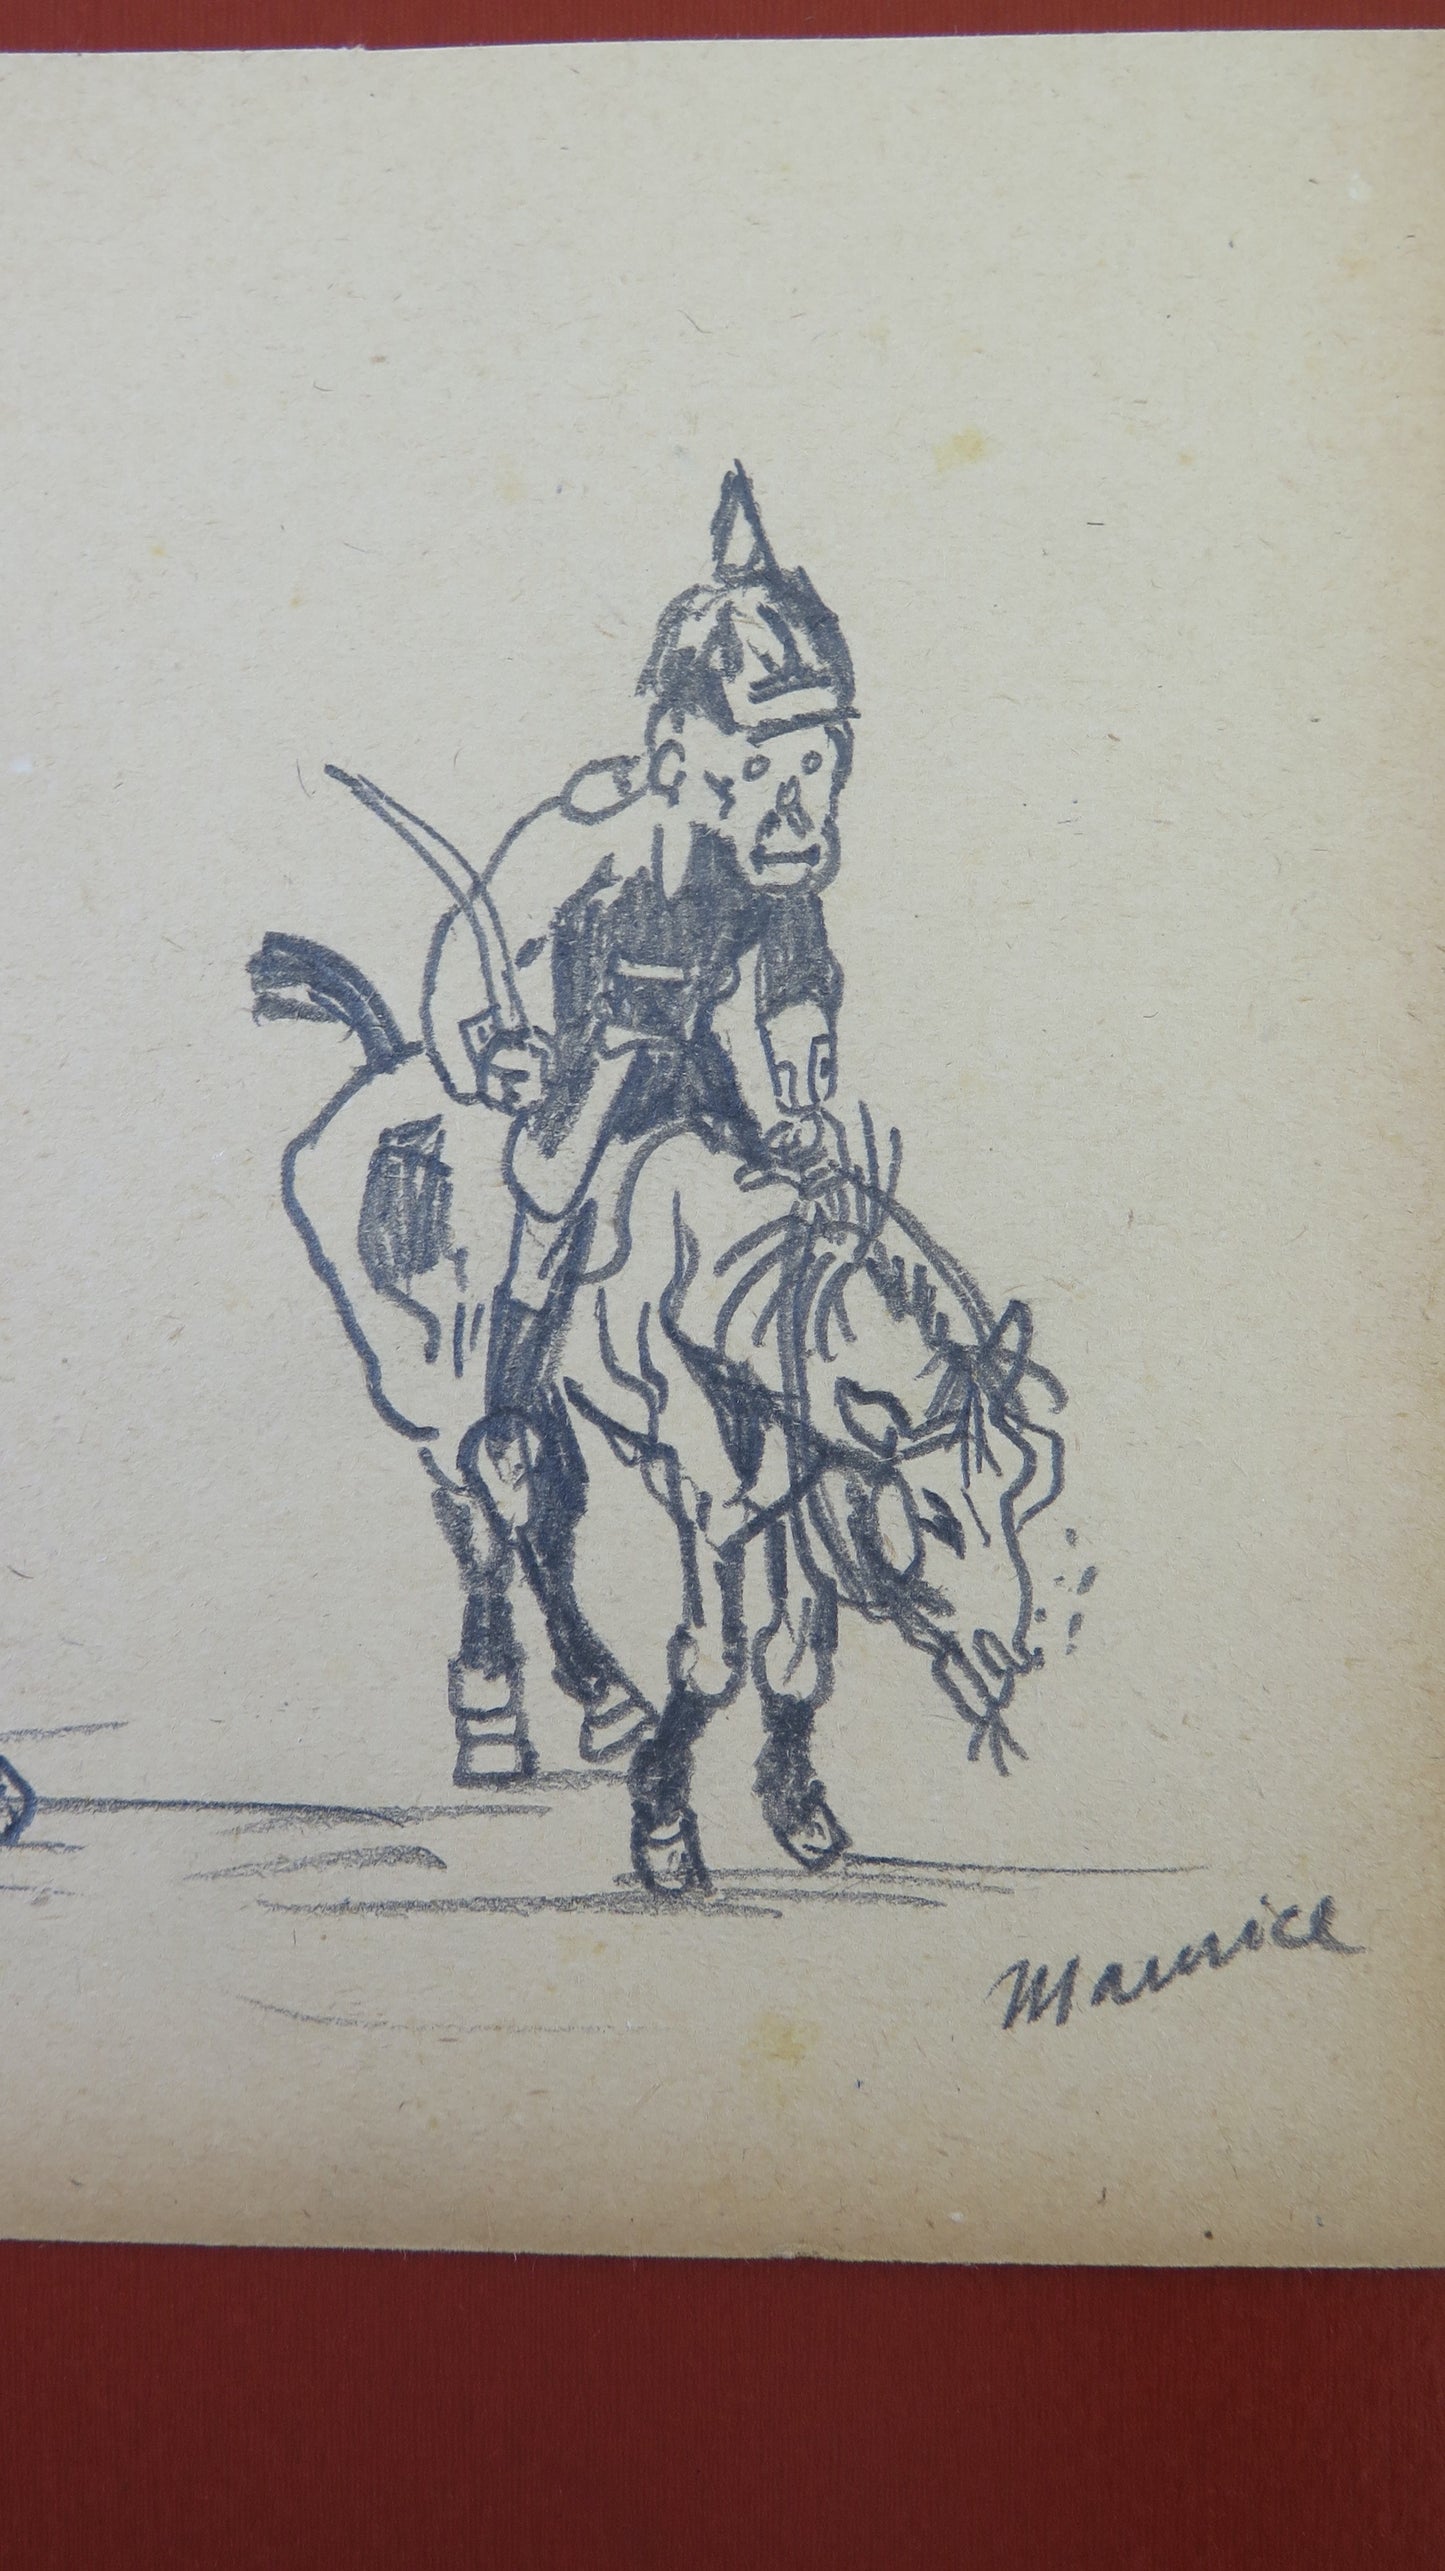 ANTIQUE PENCIL DRAWING ON PAPER SIGNED HUMORISTIC THEME SOLDIERS ON HORSE BM53.5C